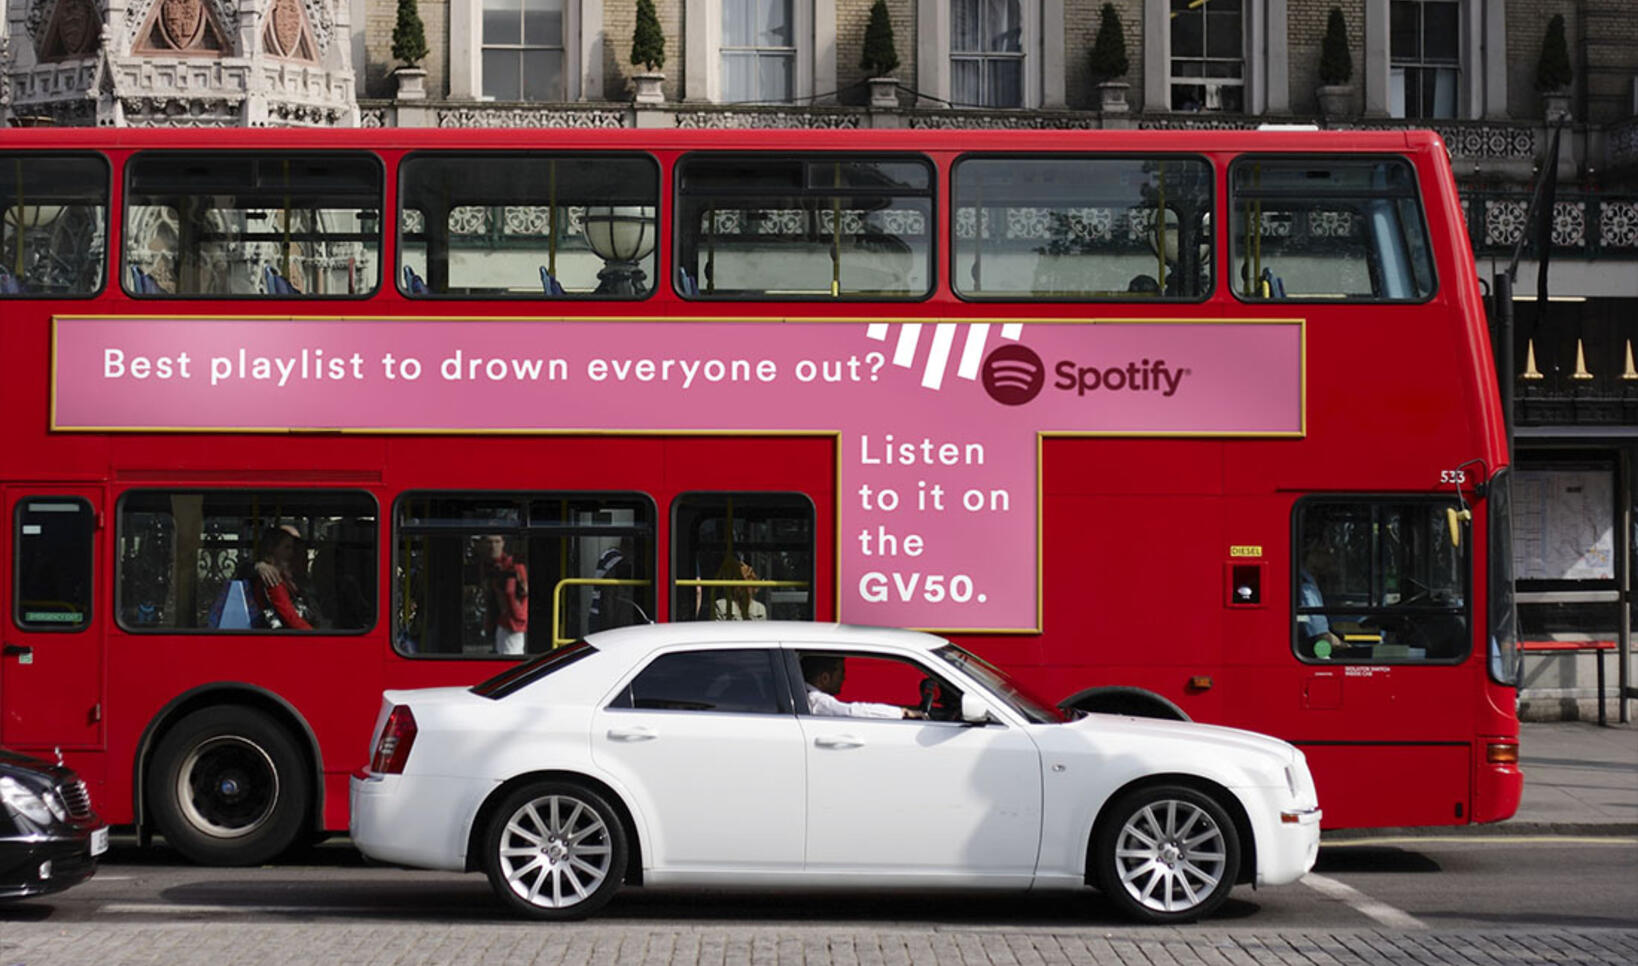 Bus, wall, and poster advertisements for Spotify's viral top 50 playlist. ; Megan Kowalski